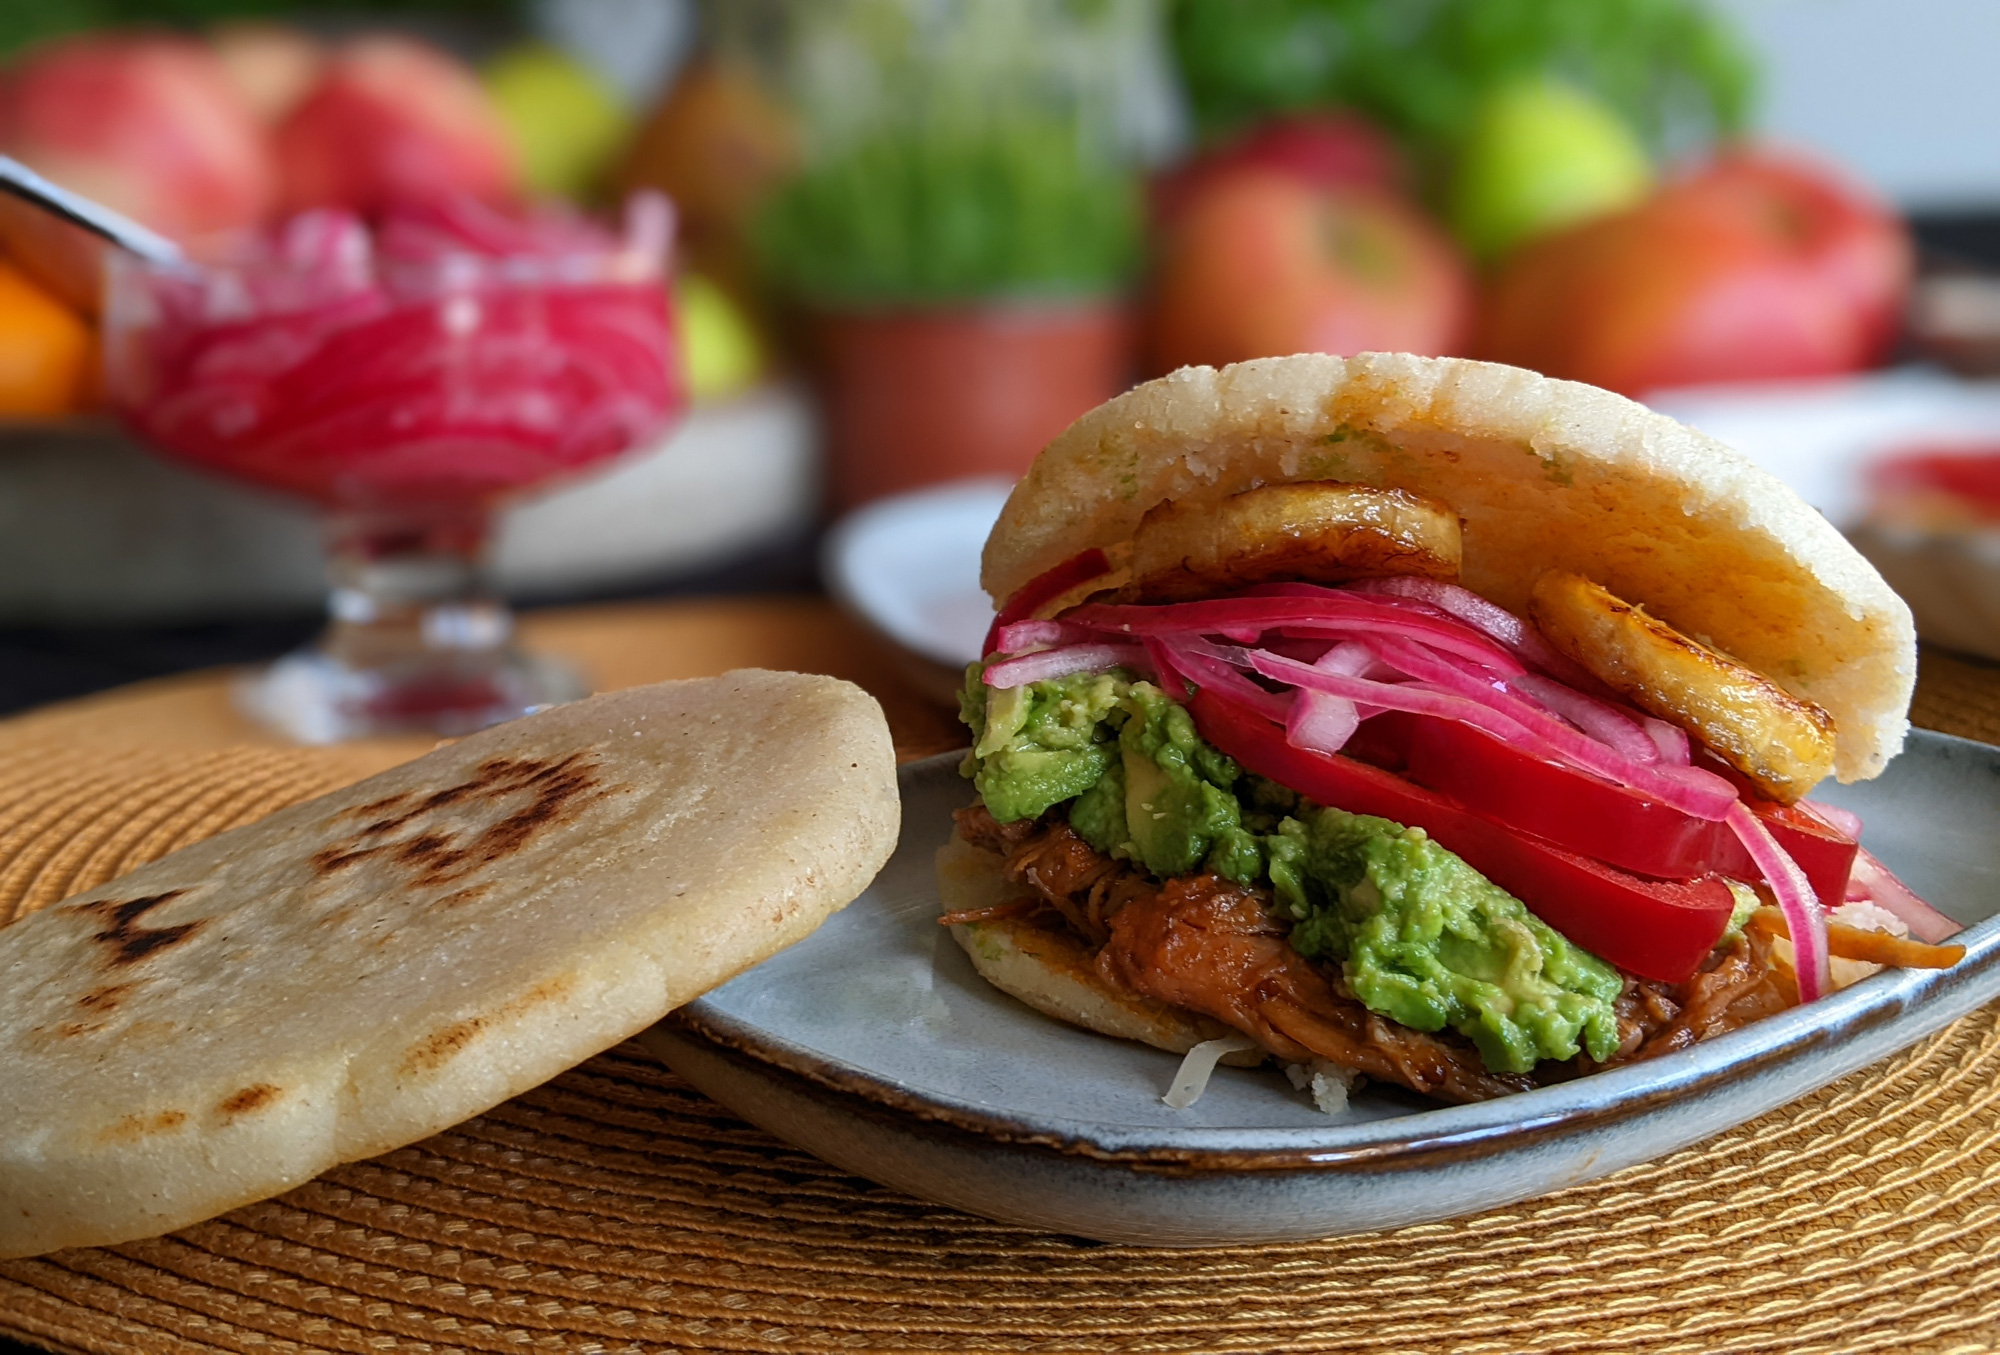 https://www.mygfguide.com/wp-content/uploads/2022/04/arepas-cover-web.jpg